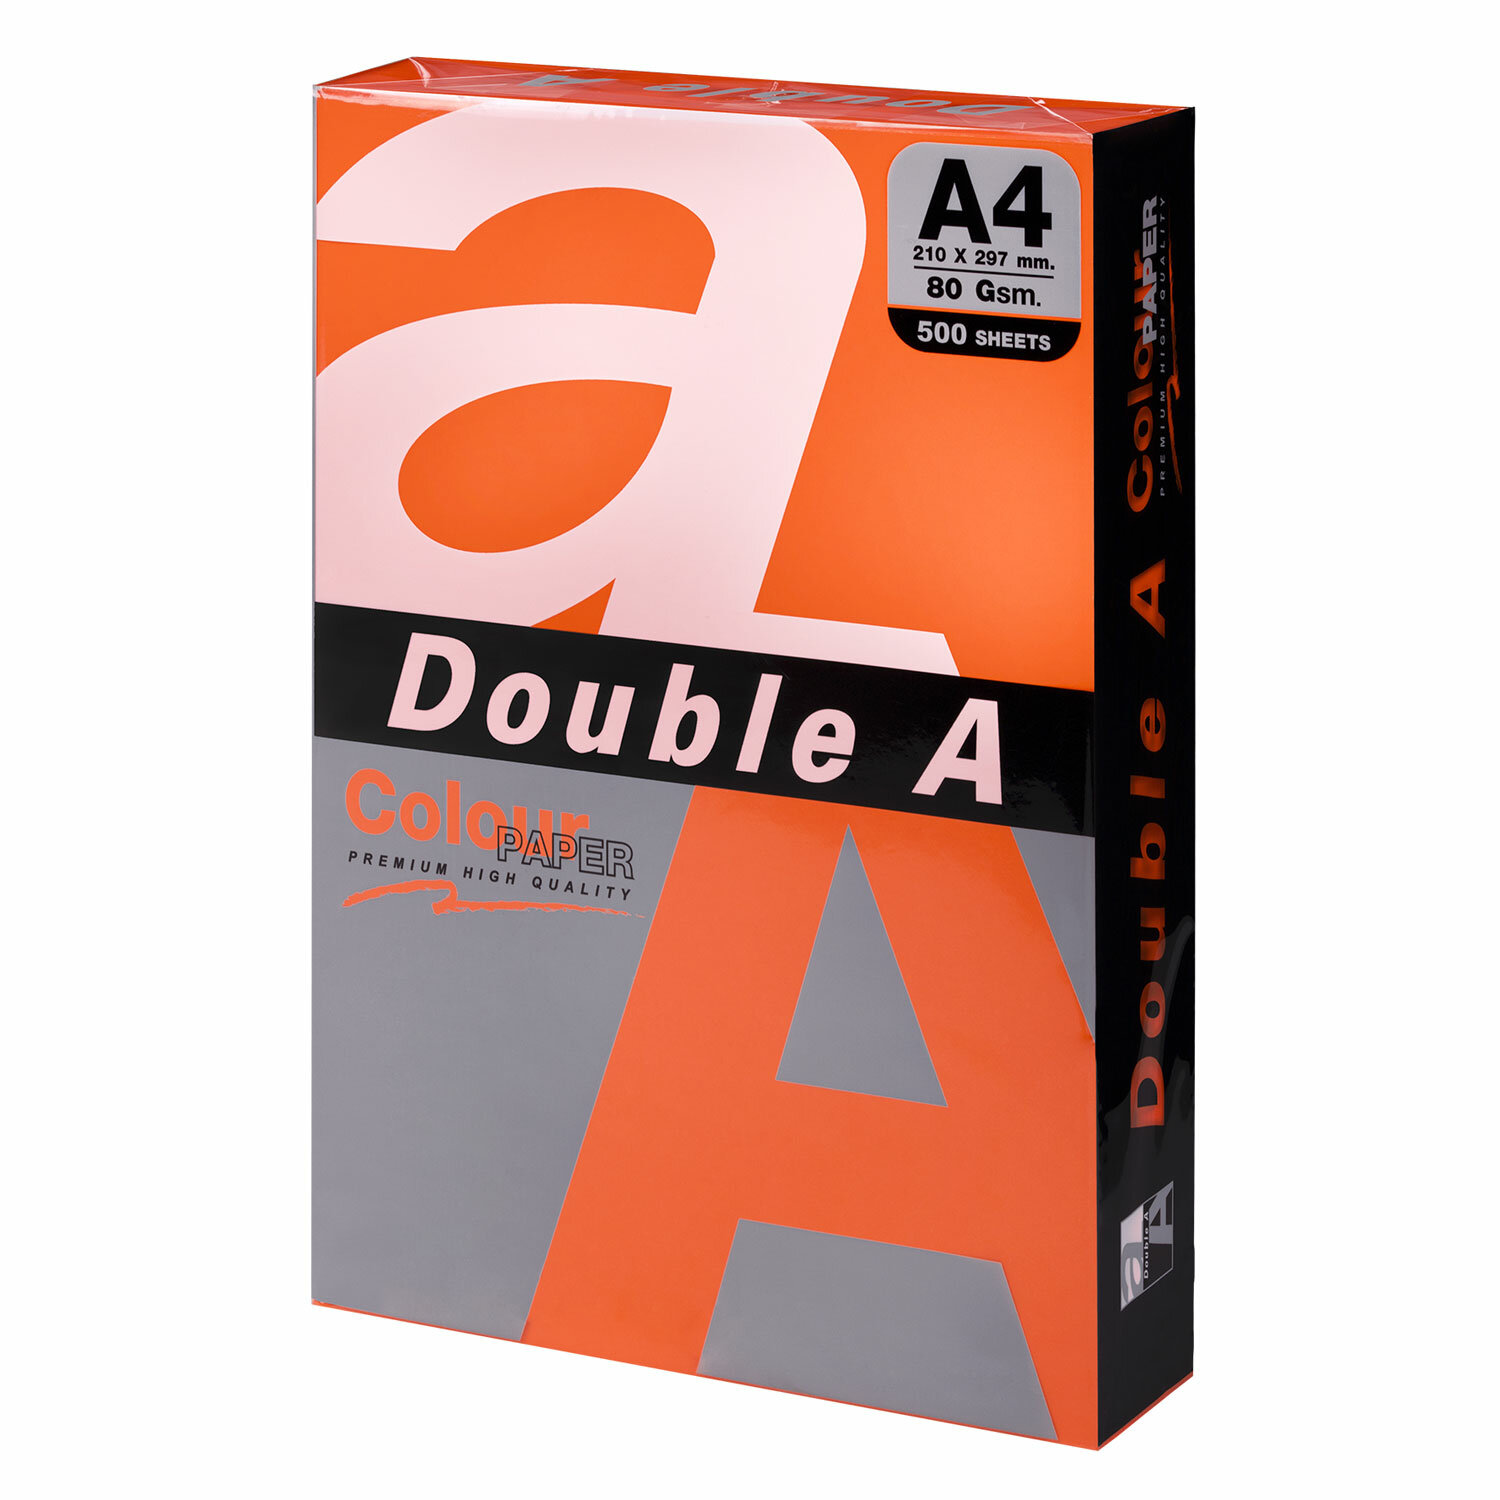 DOUBLE A   DOUBLE A 4, 80 /2, 500 , , 